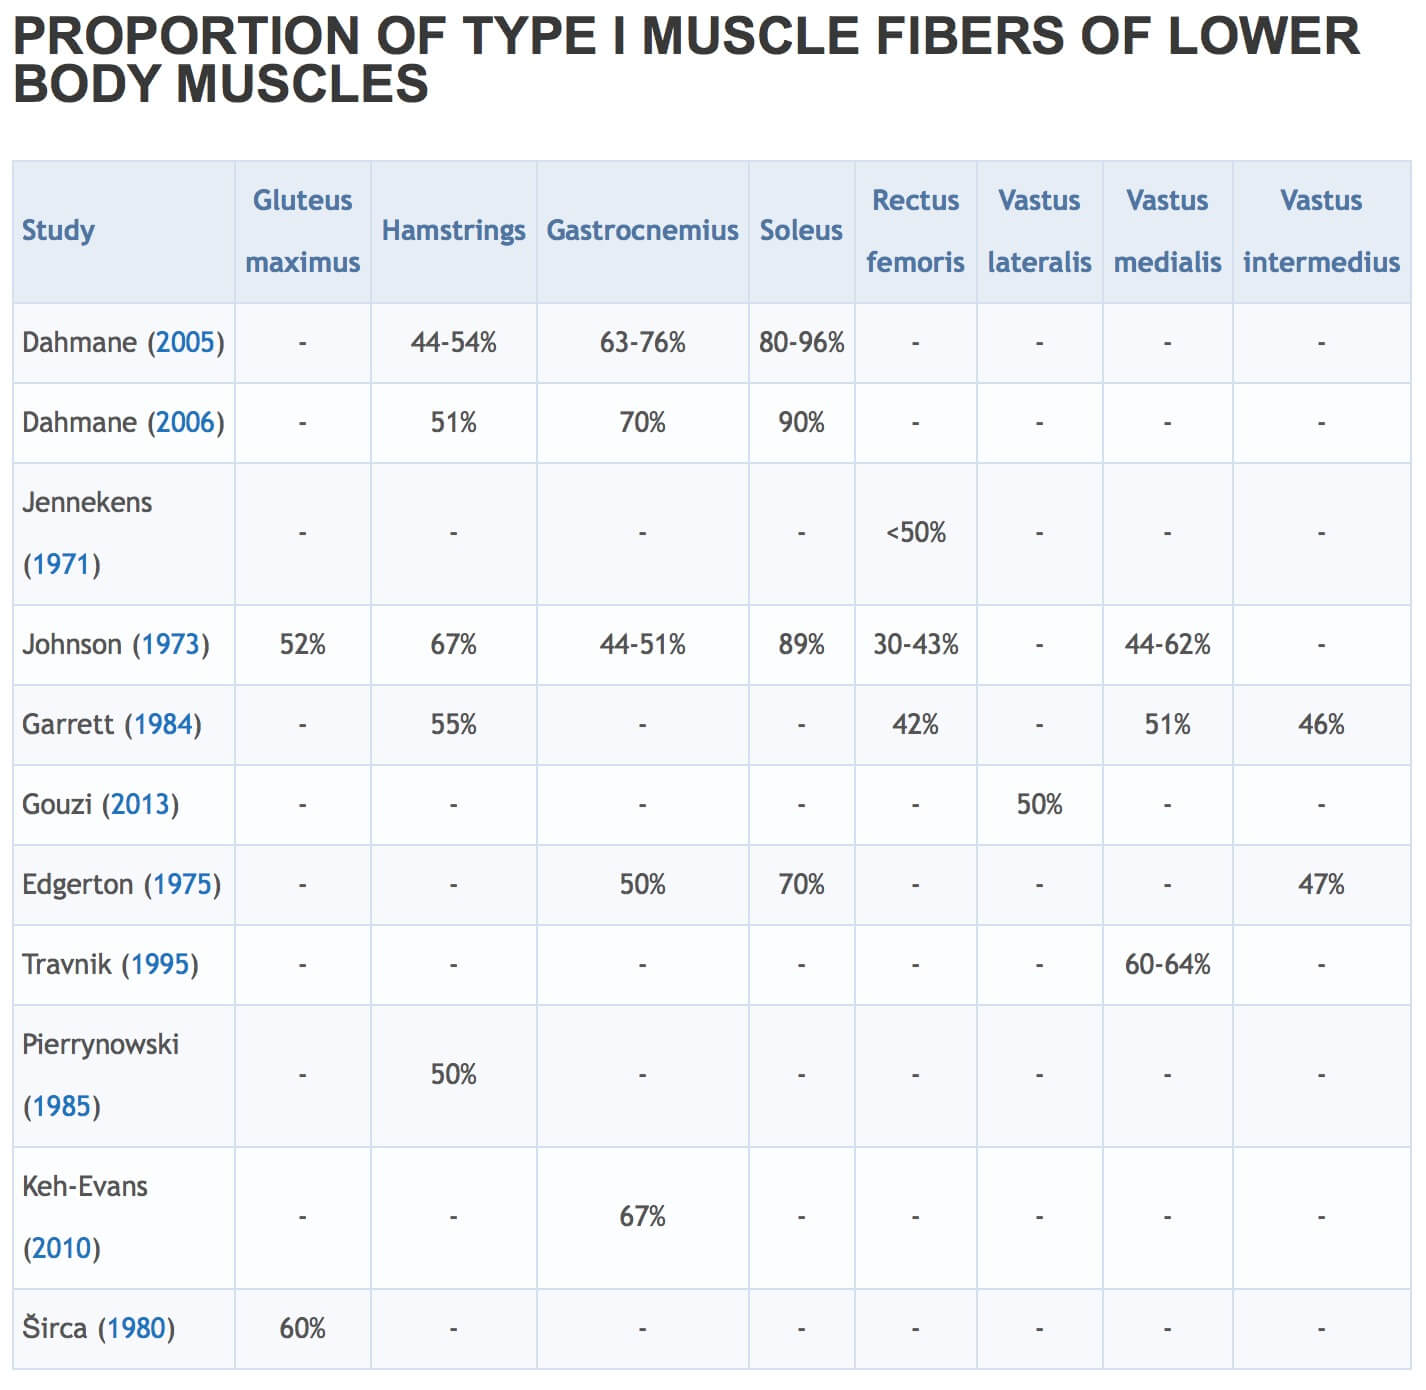 Image Source. Be sure to check out the chart for upper body muscles as well.